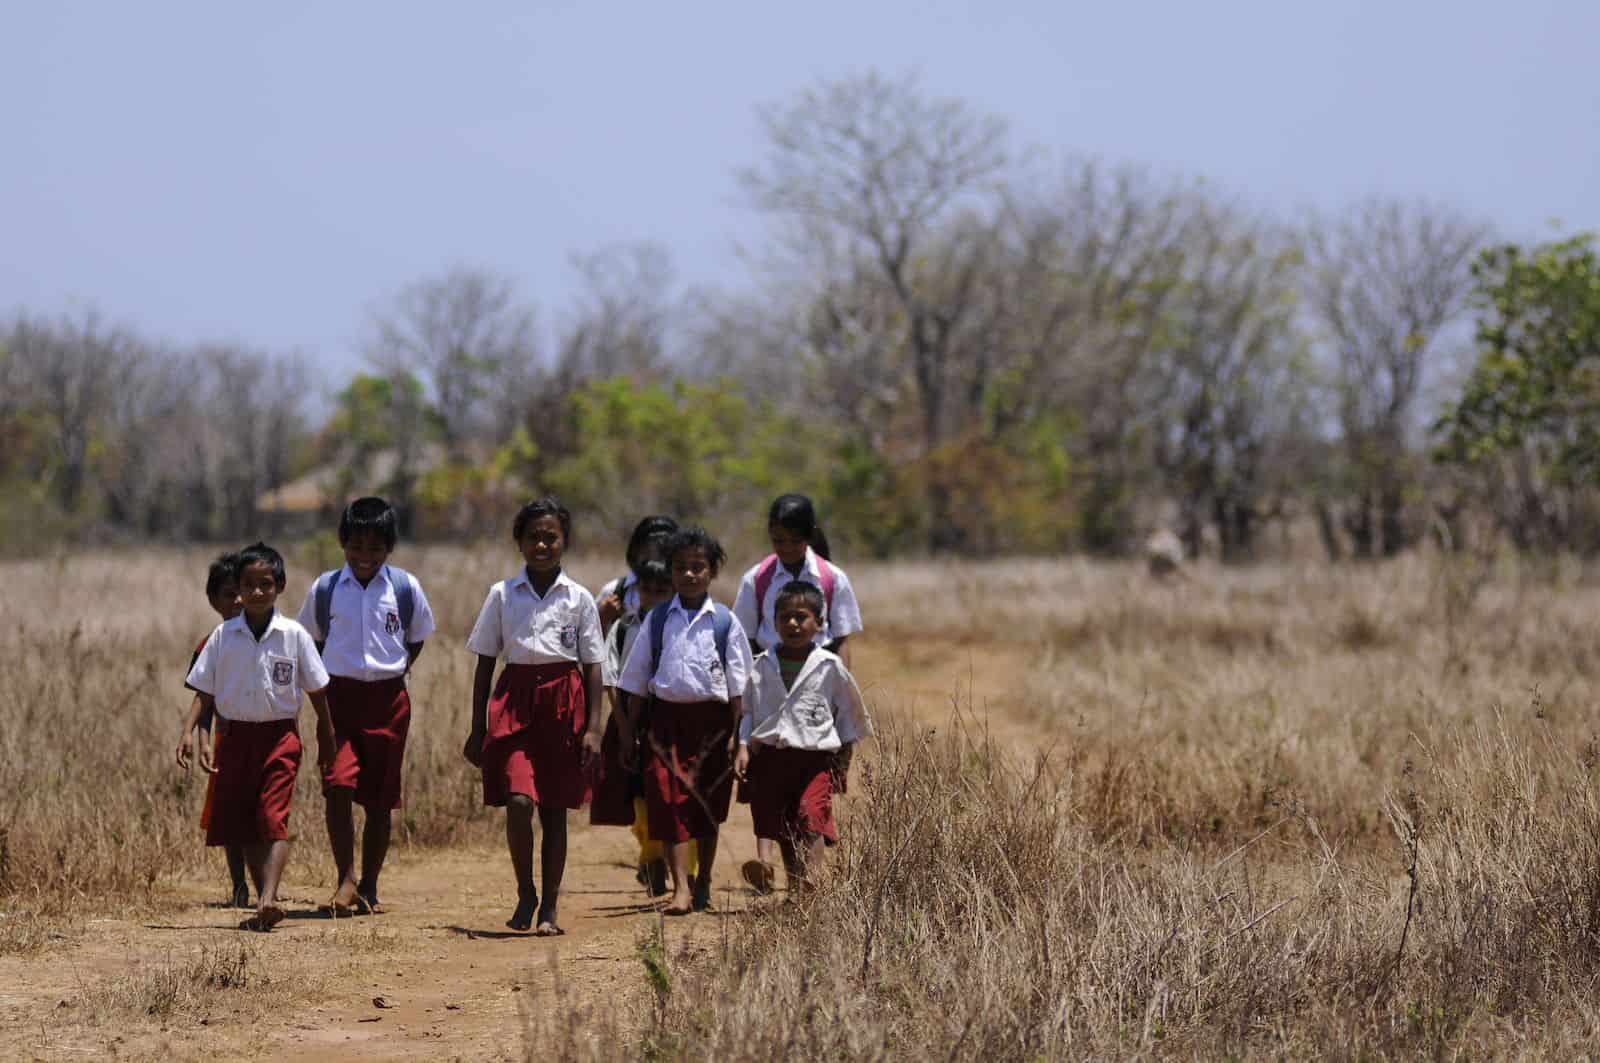 A group of students wearing red and white school uniforms walk down a dirt road in a brown field with trees in the background.